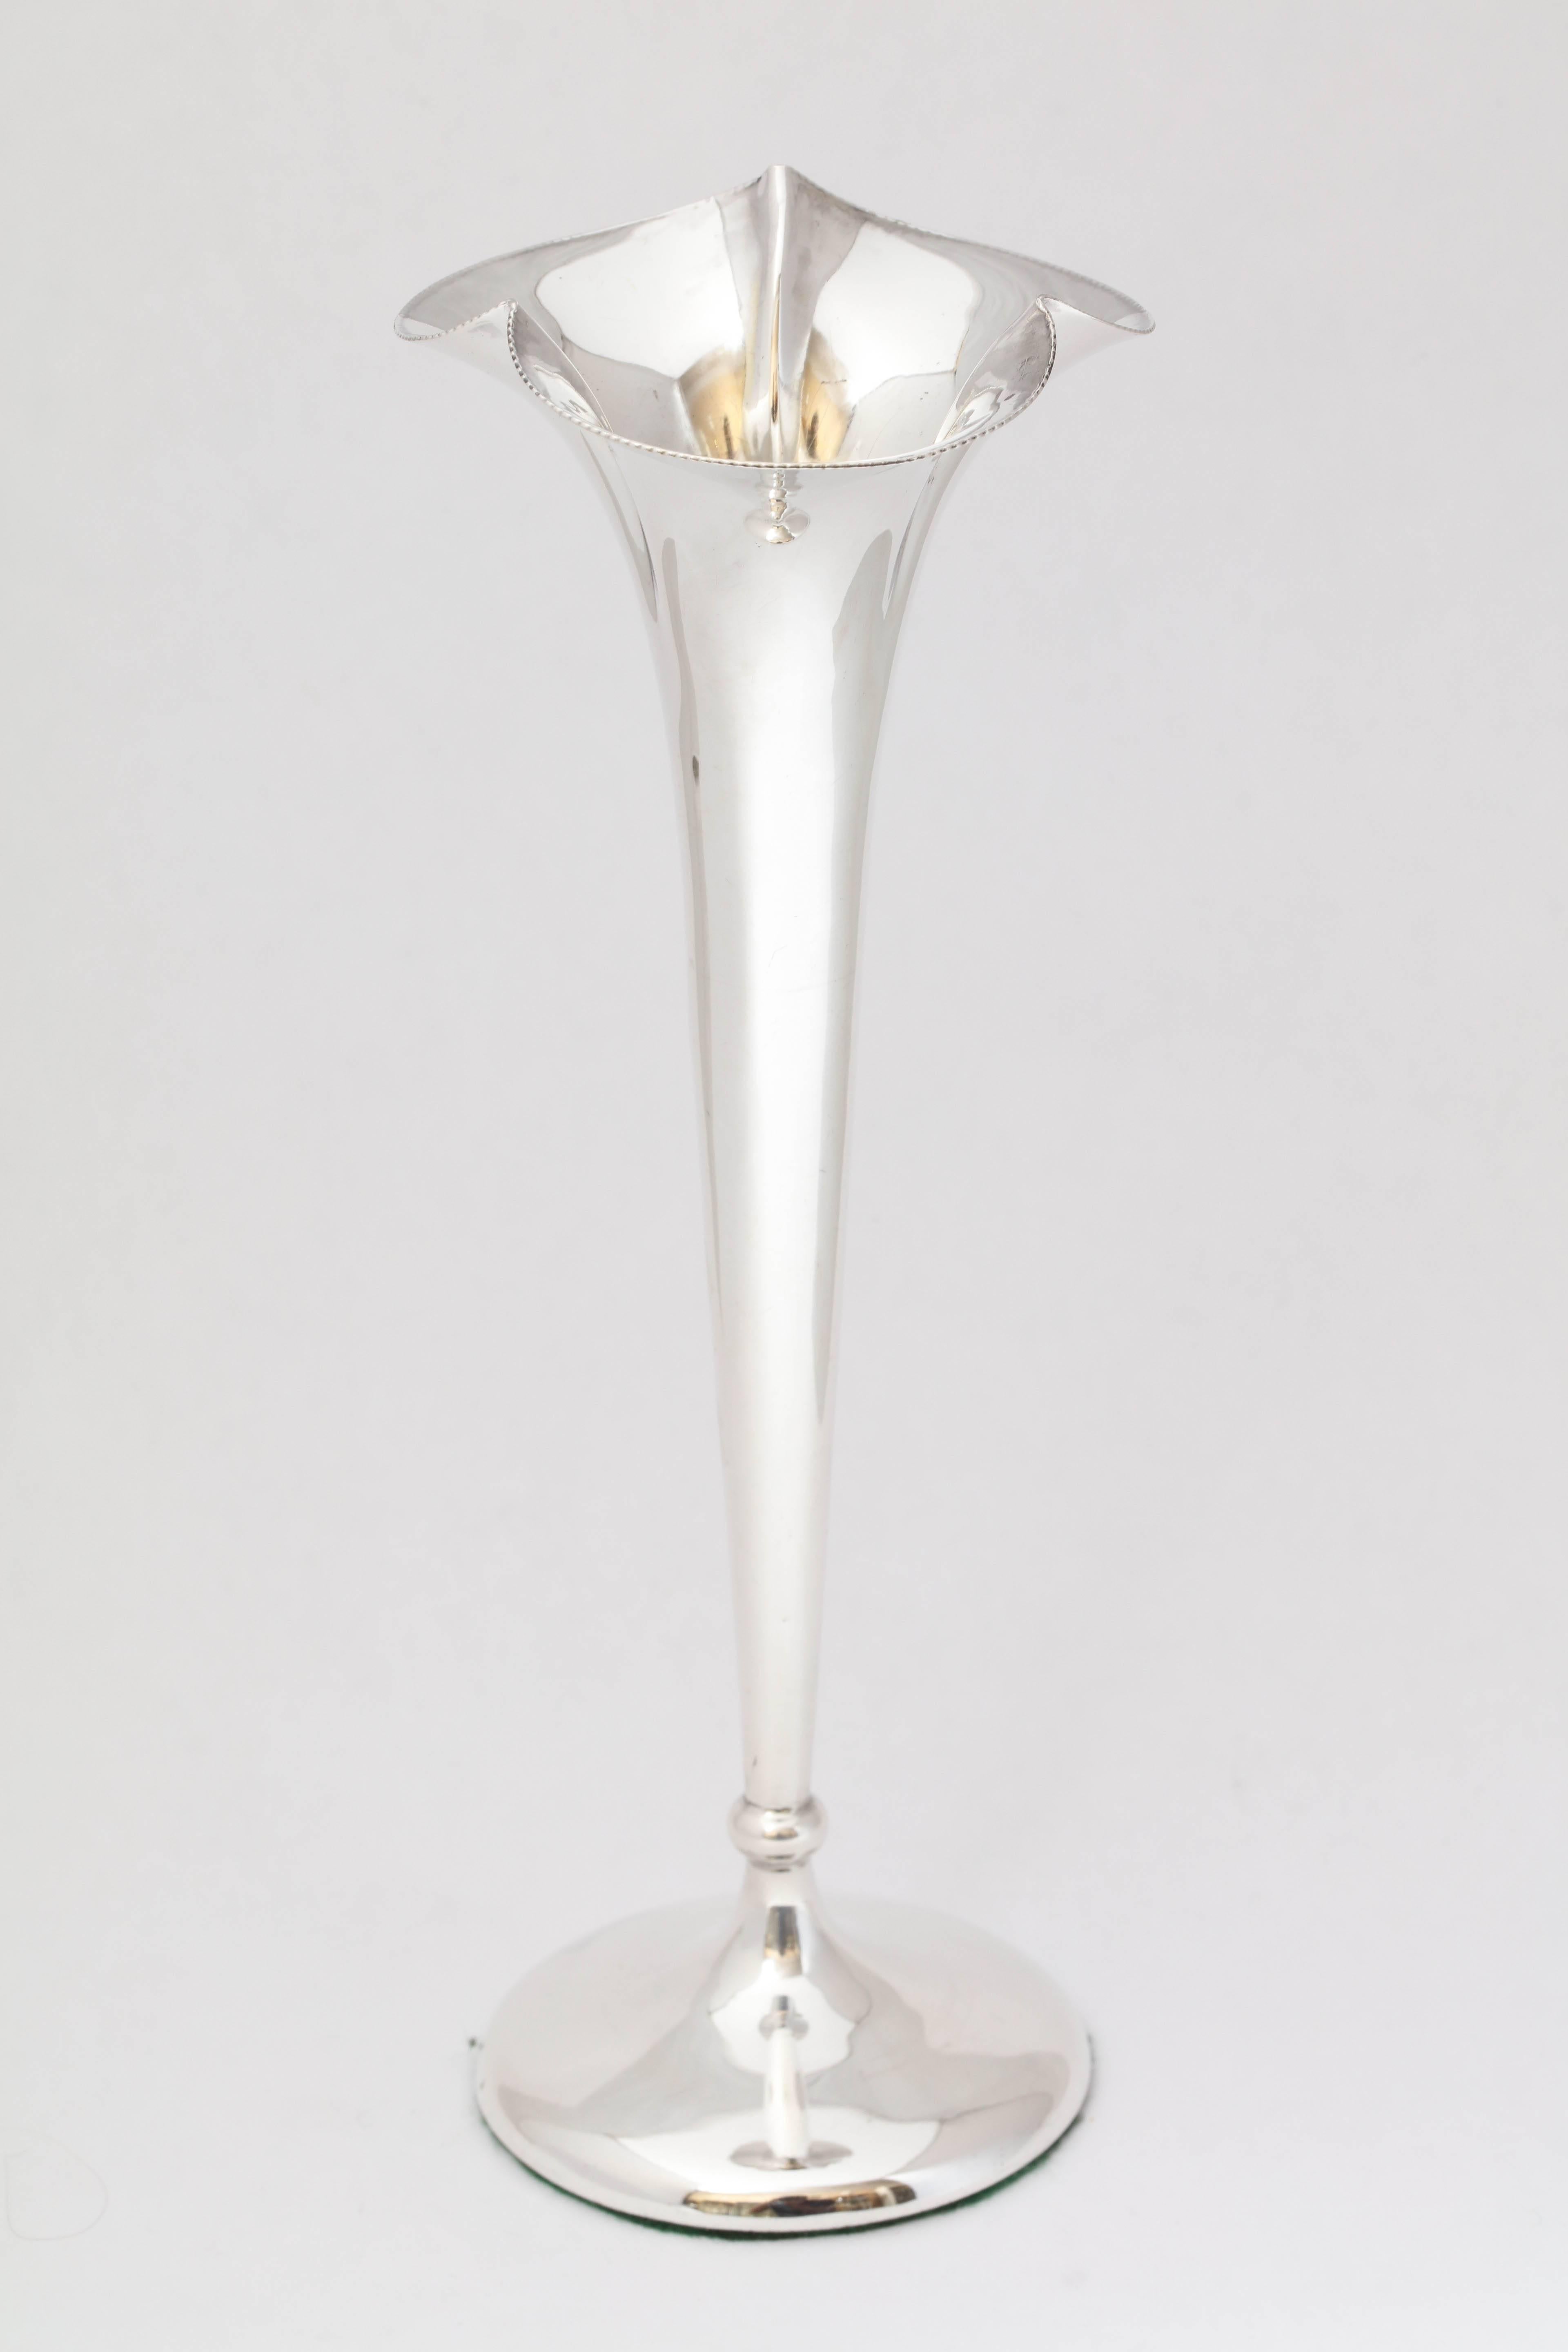 Edwardian, sterling silver bud vase with fluted top, Birmingham, England, 1903, Cornelius Desormeux Sanders and James Francis Hollings Shepherd - makers. Measures: 8 inches tall x 3 inches diameter across fluted opening x 2 1/2 inches diameter